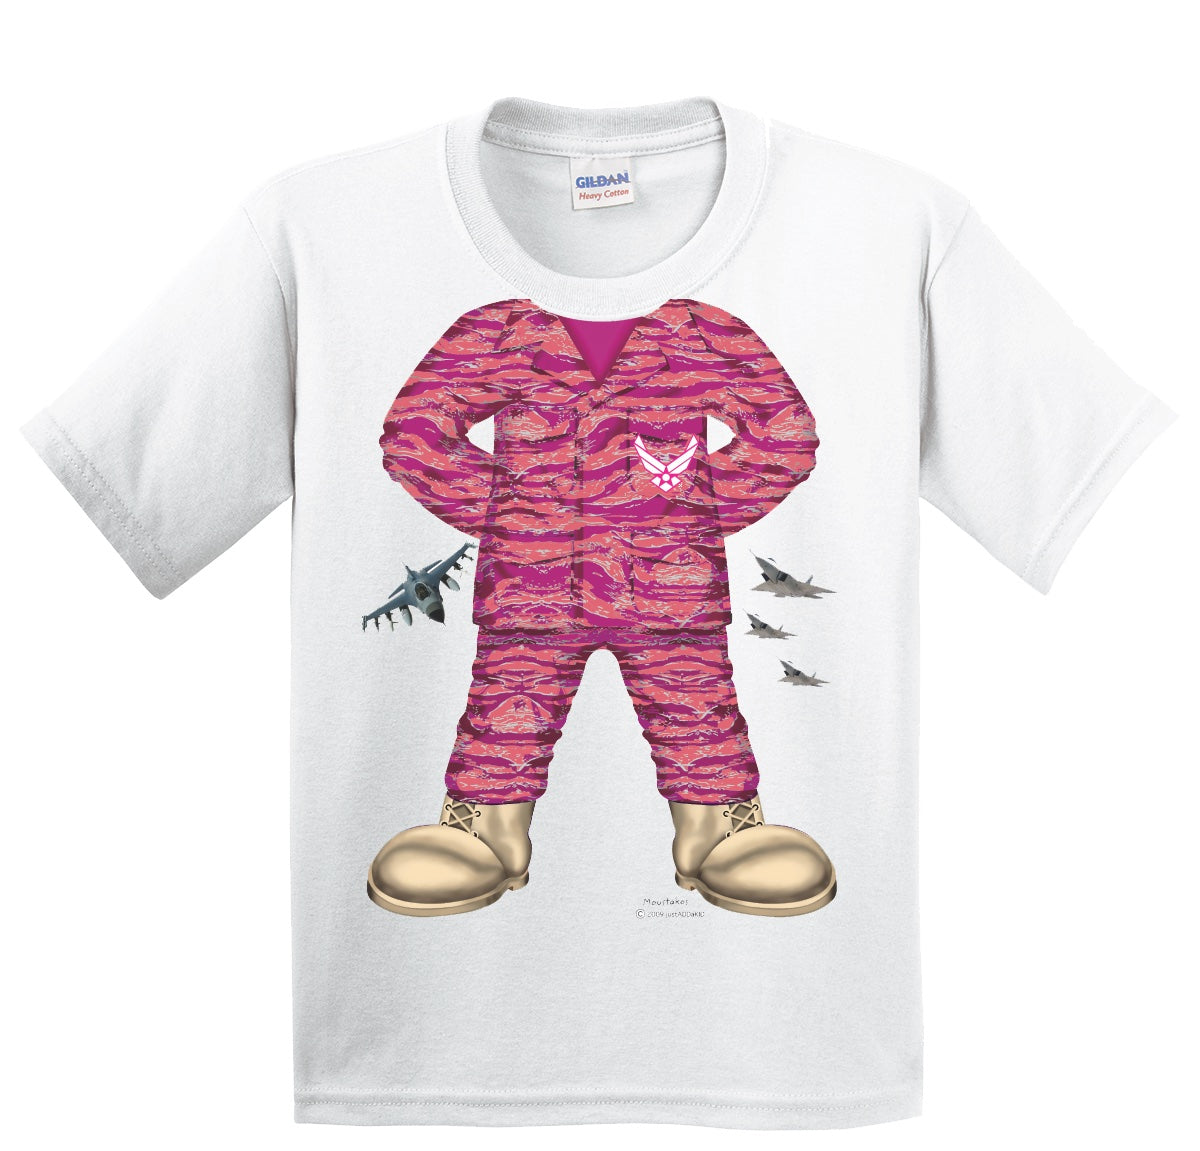 US Air Force Camo Uniform on White Toddler Shirts